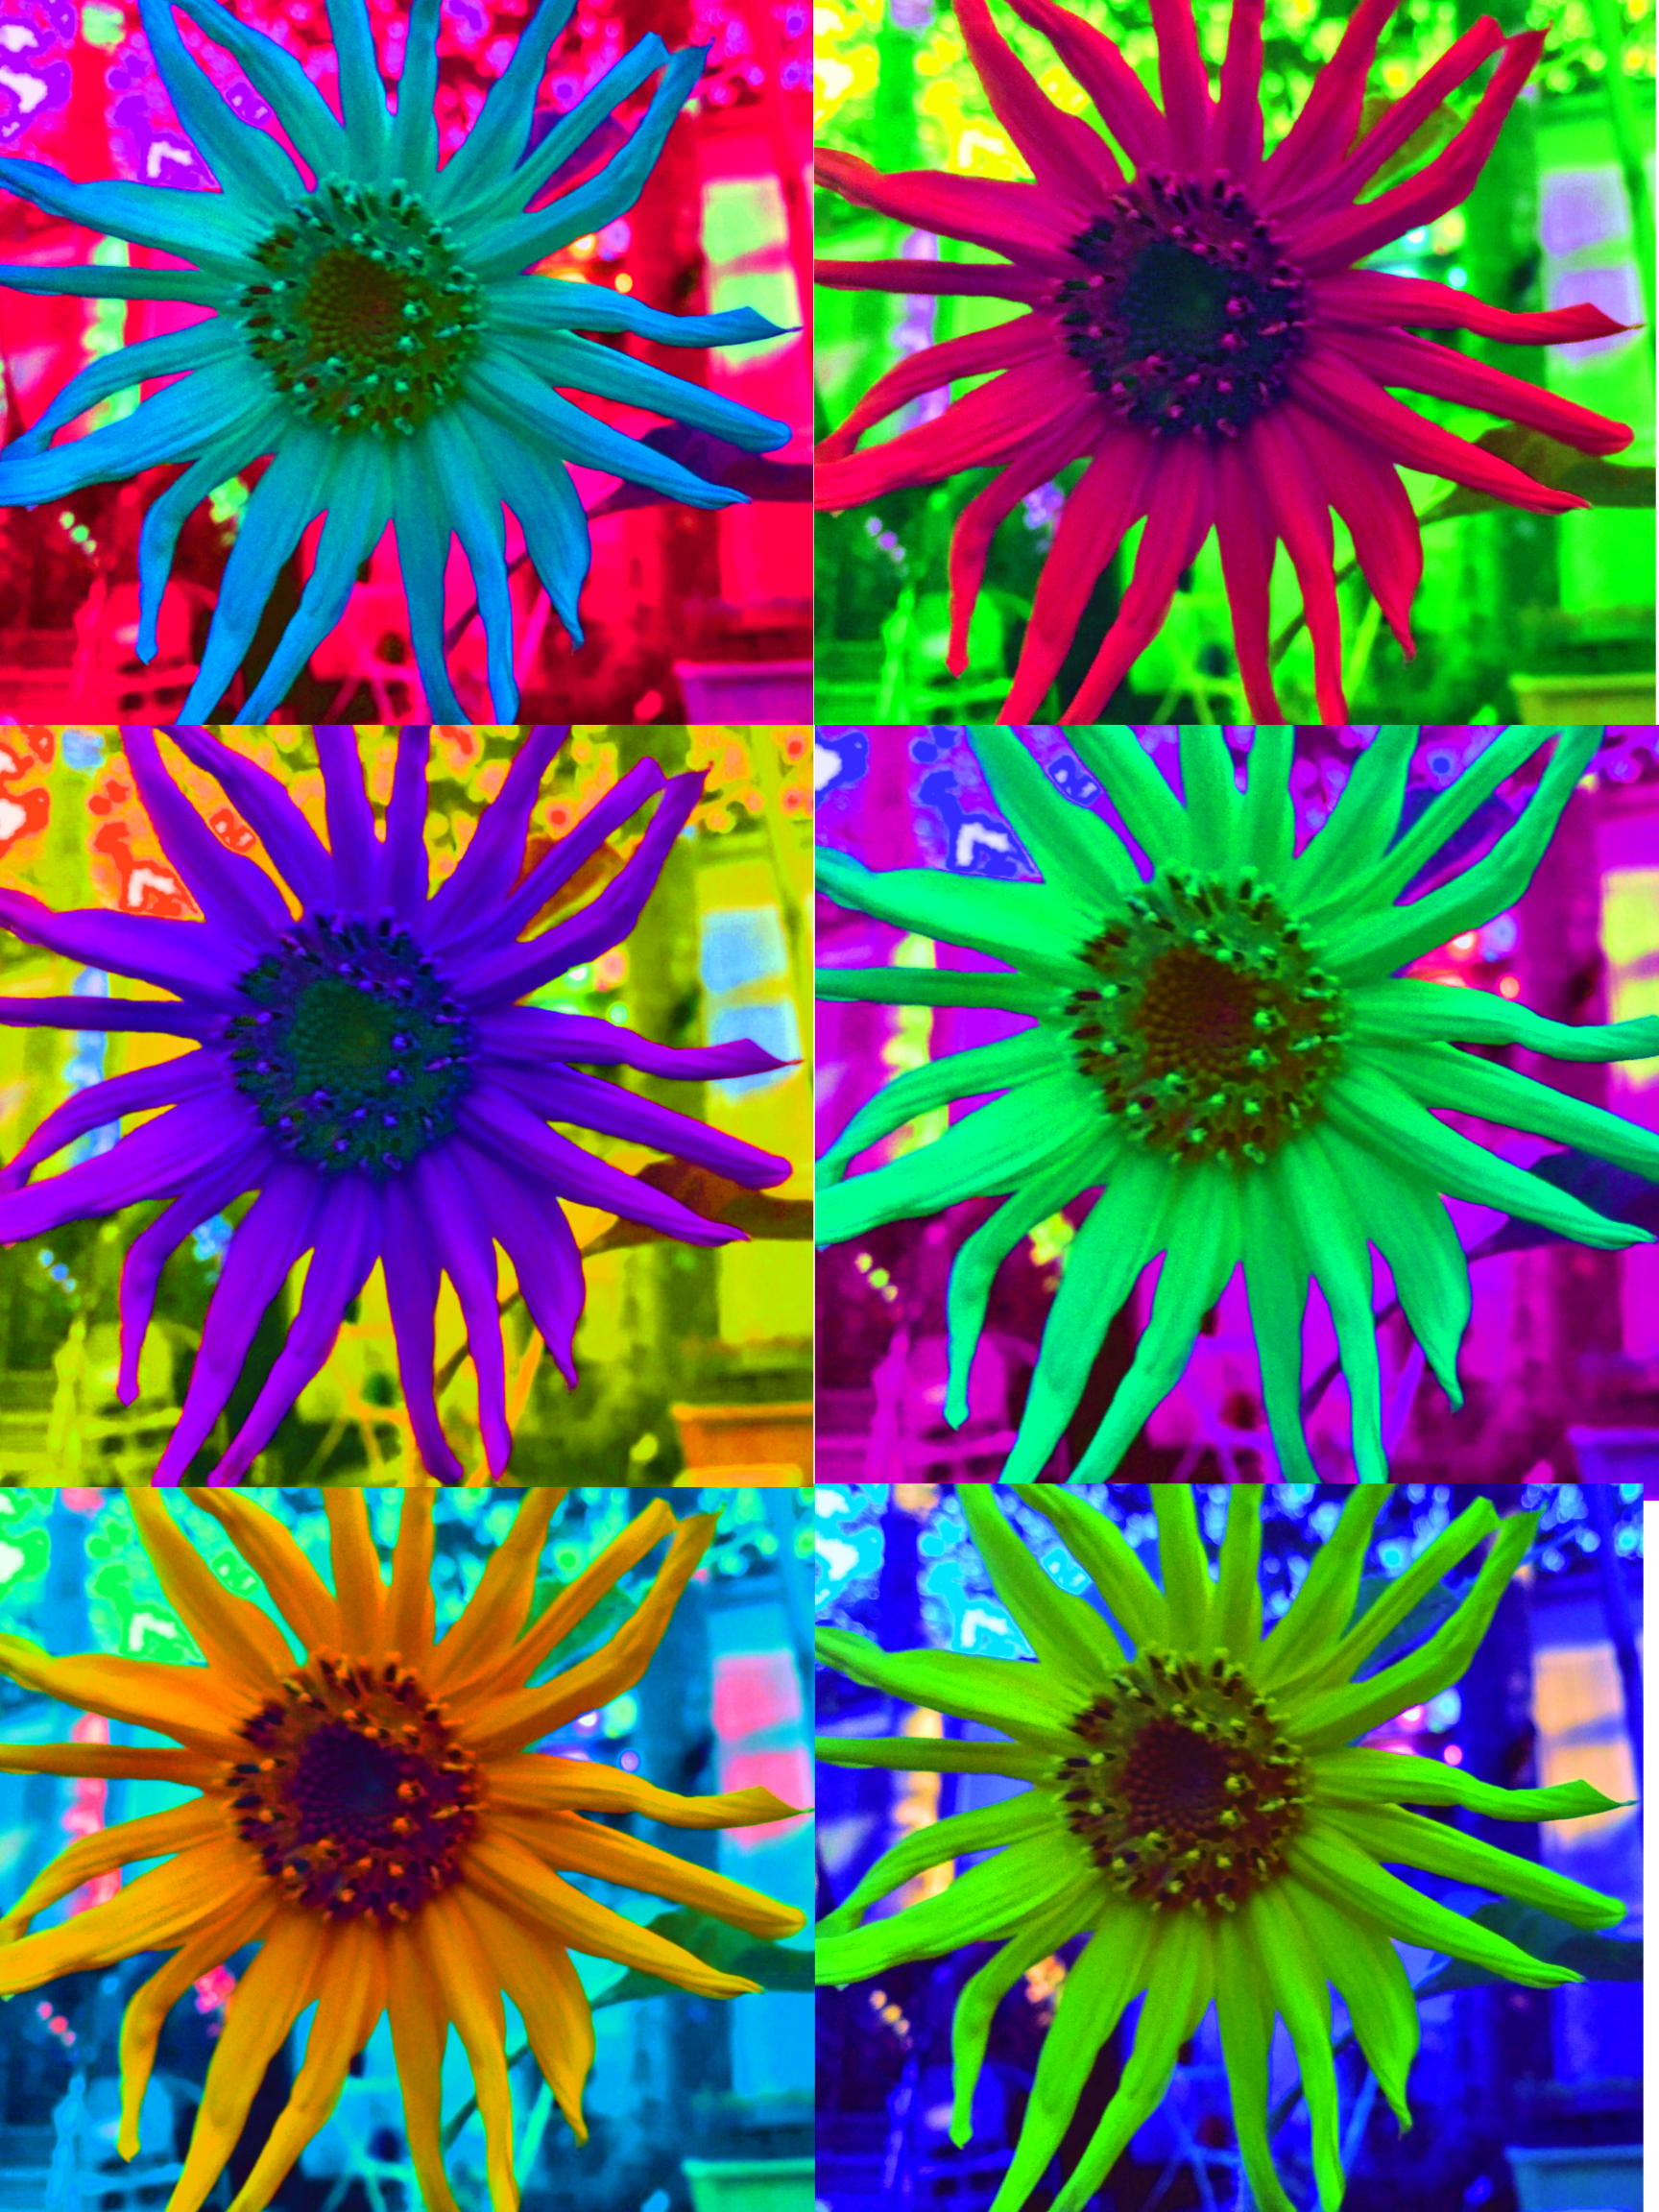 Mutli-colored sunflowers in six panel layout